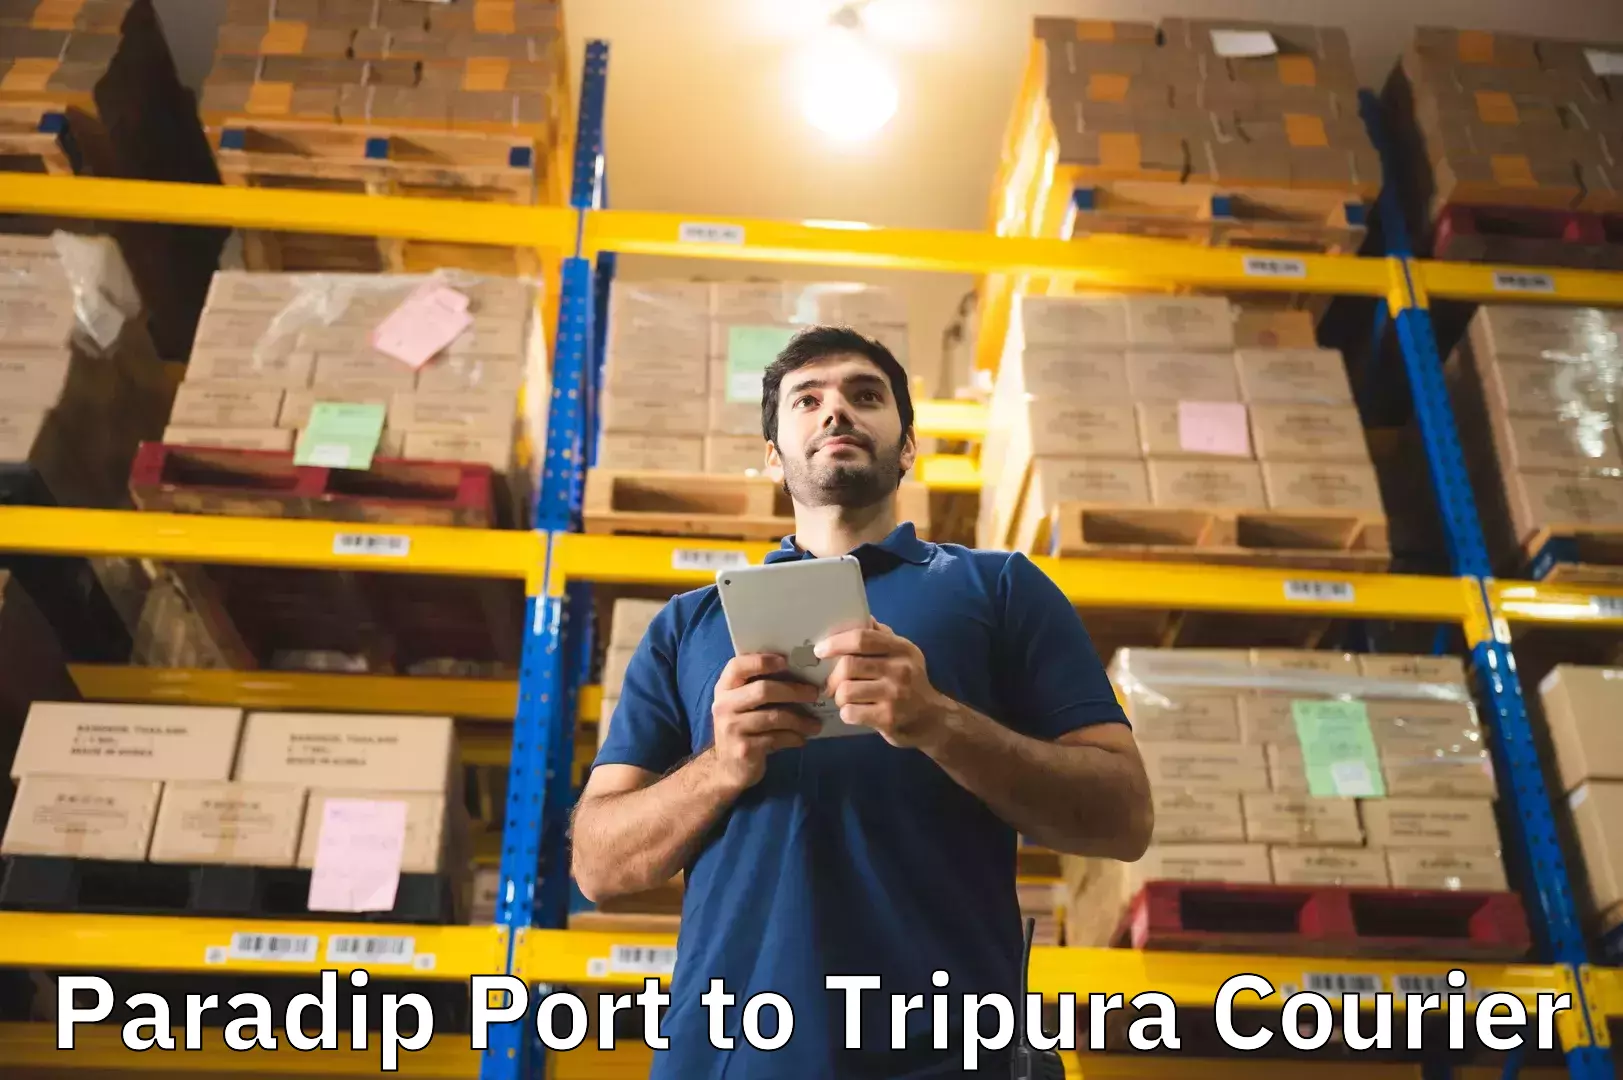 Luggage shipment specialists Paradip Port to Tripura